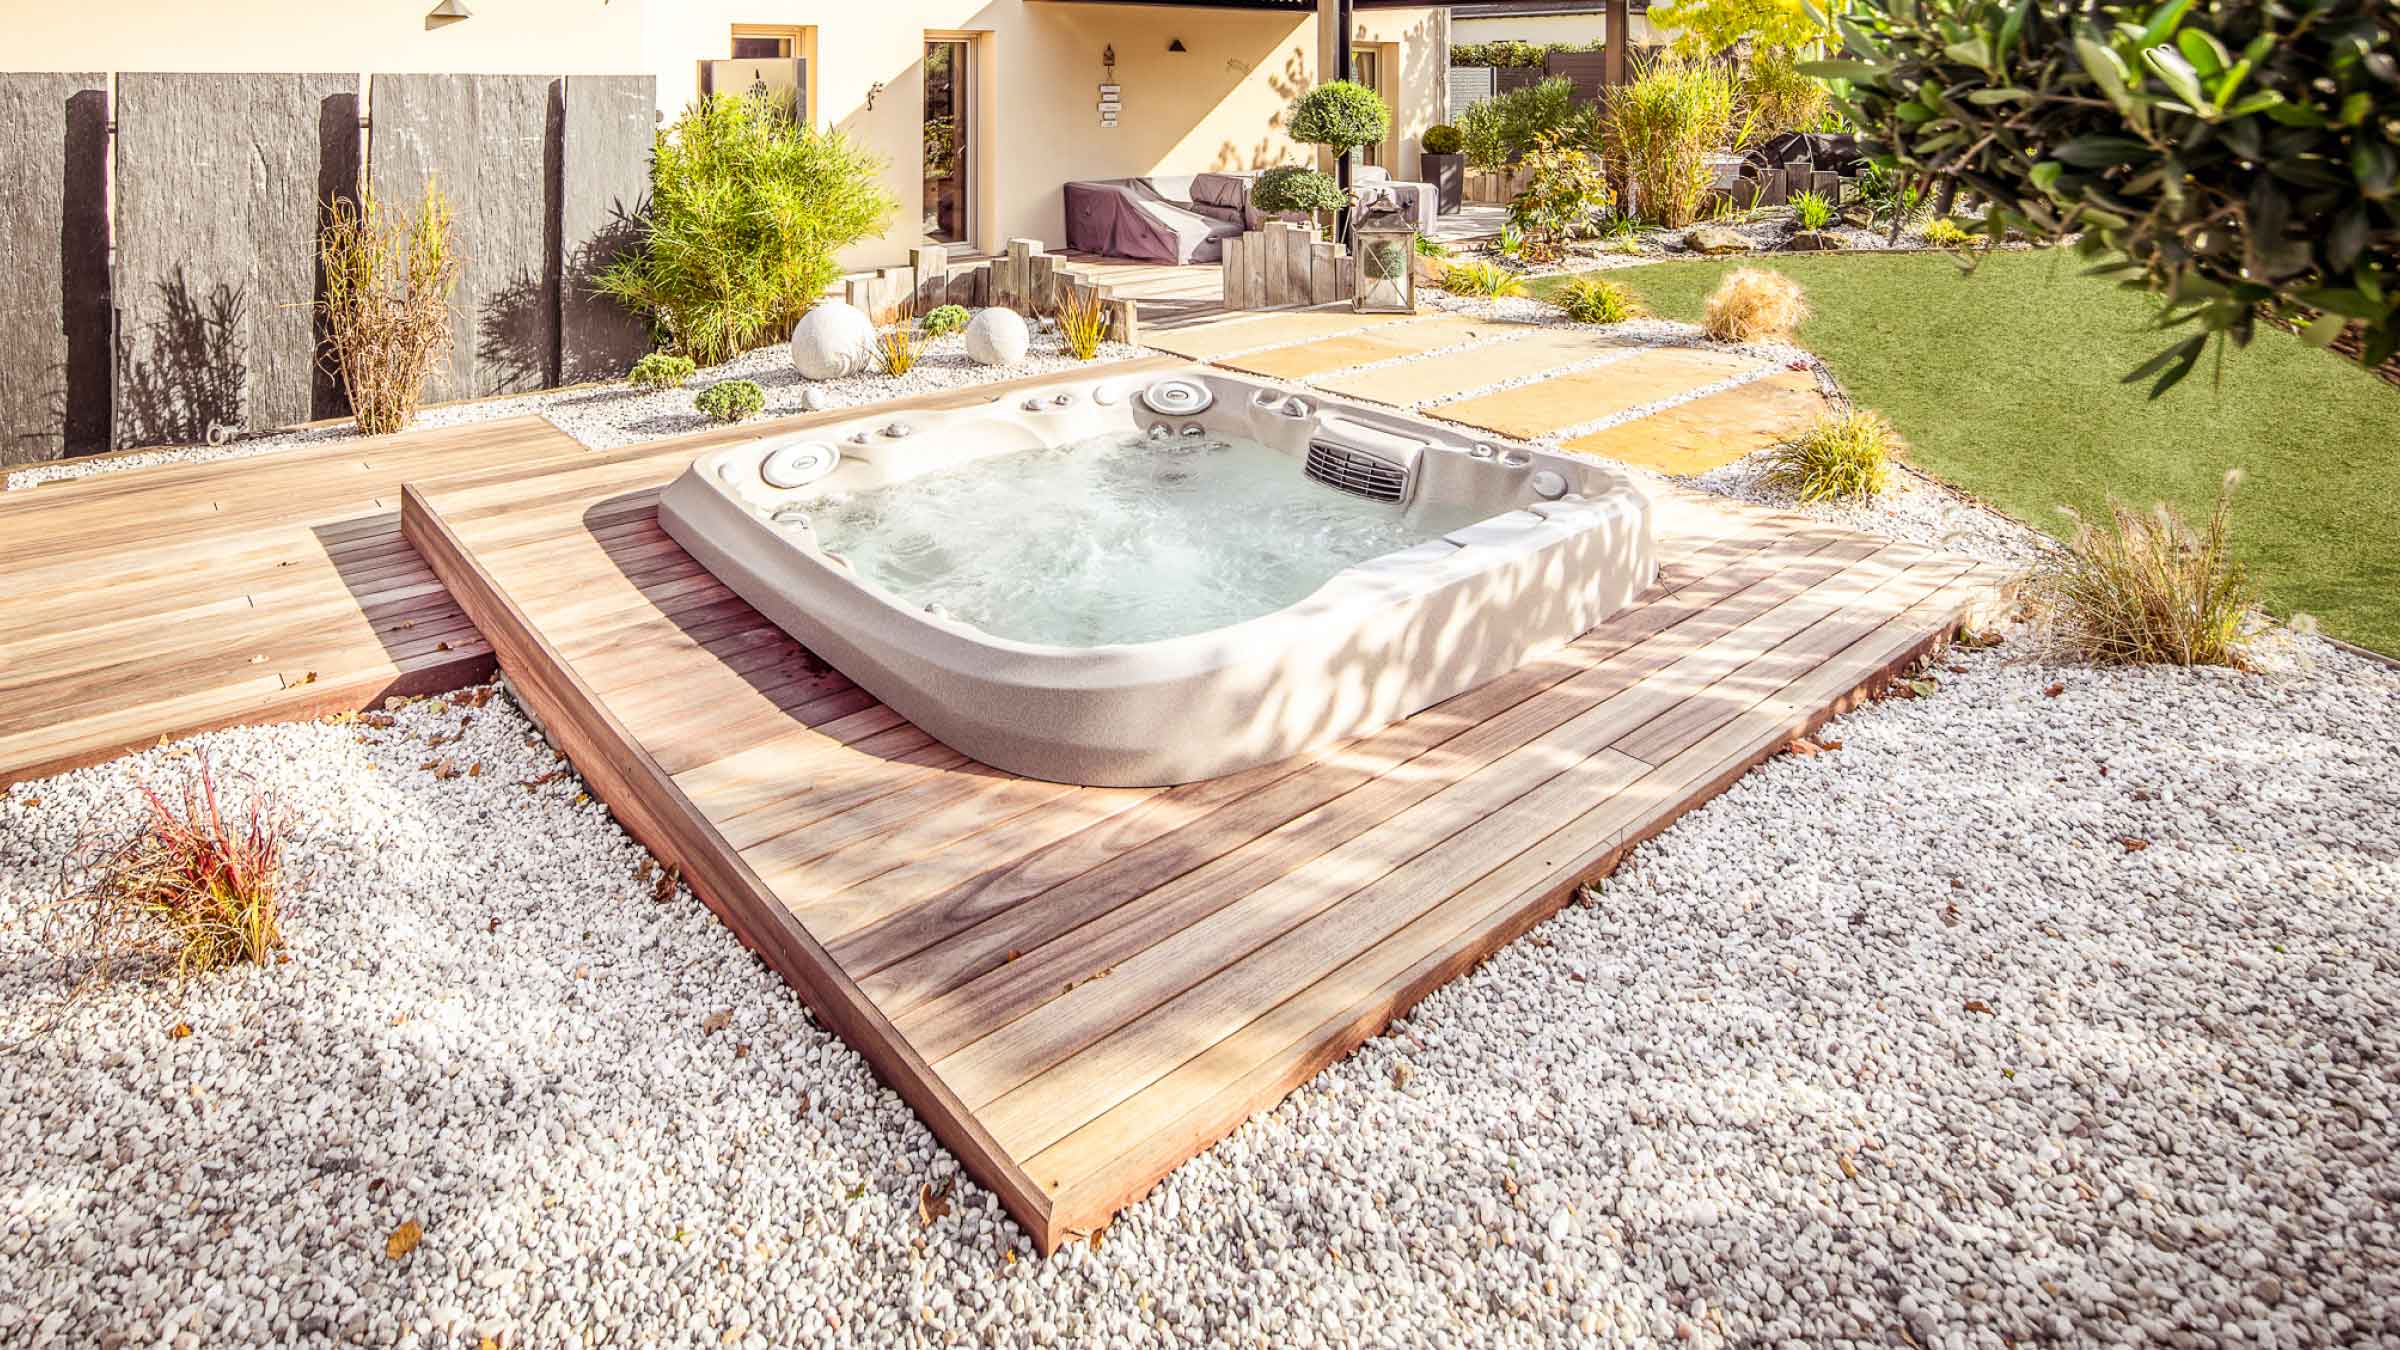 Spa with jets turned on, surrounded in timber decking sits beside a home with green shrubs dotted around.